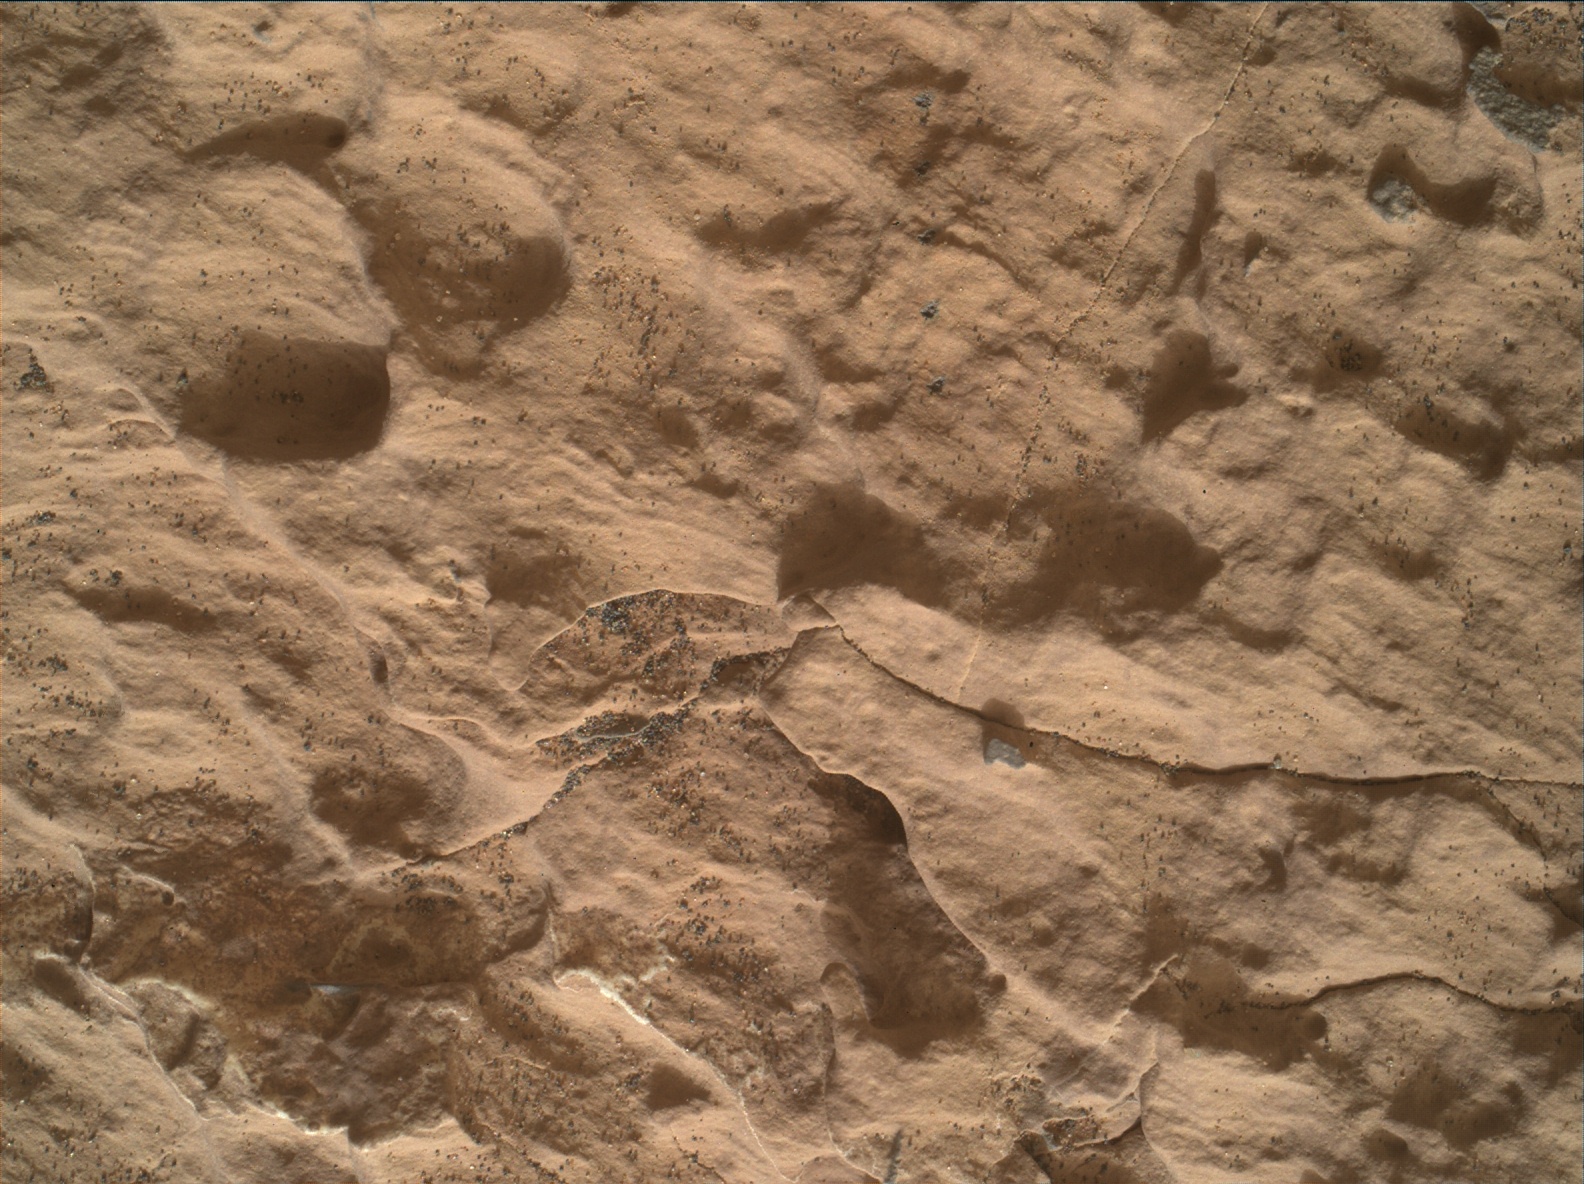 Nasa's Mars rover Curiosity acquired this image using its Mars Hand Lens Imager (MAHLI) on Sol 1668